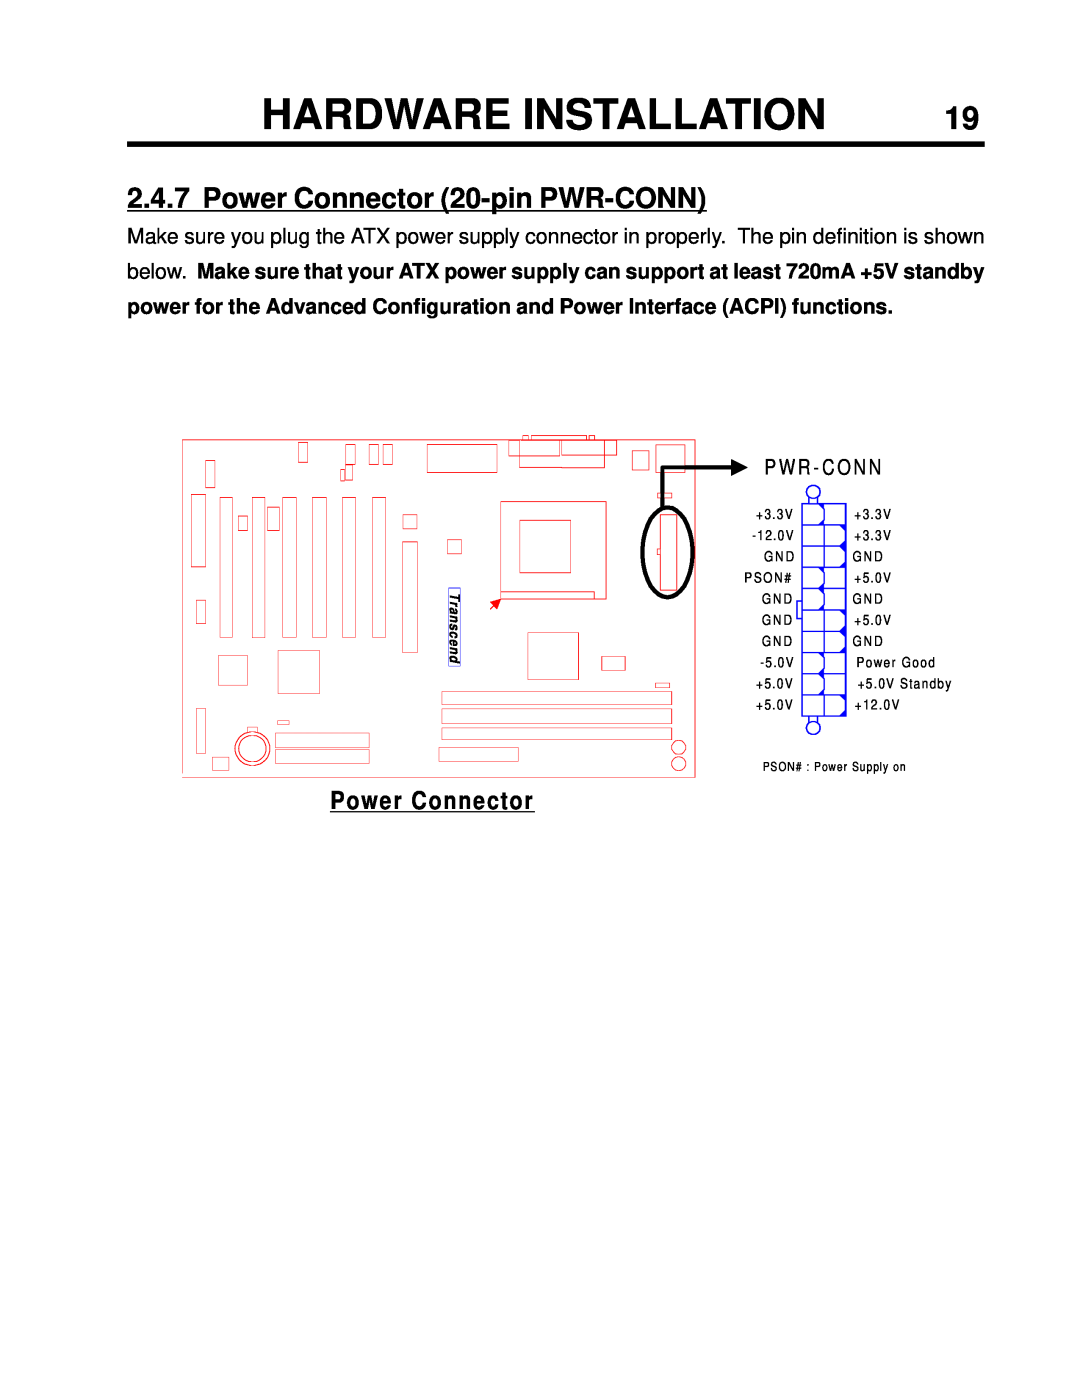 Intel TS-ASP3 user manual Power Connector 20-pin PWR-CONN, Hardware Installation 